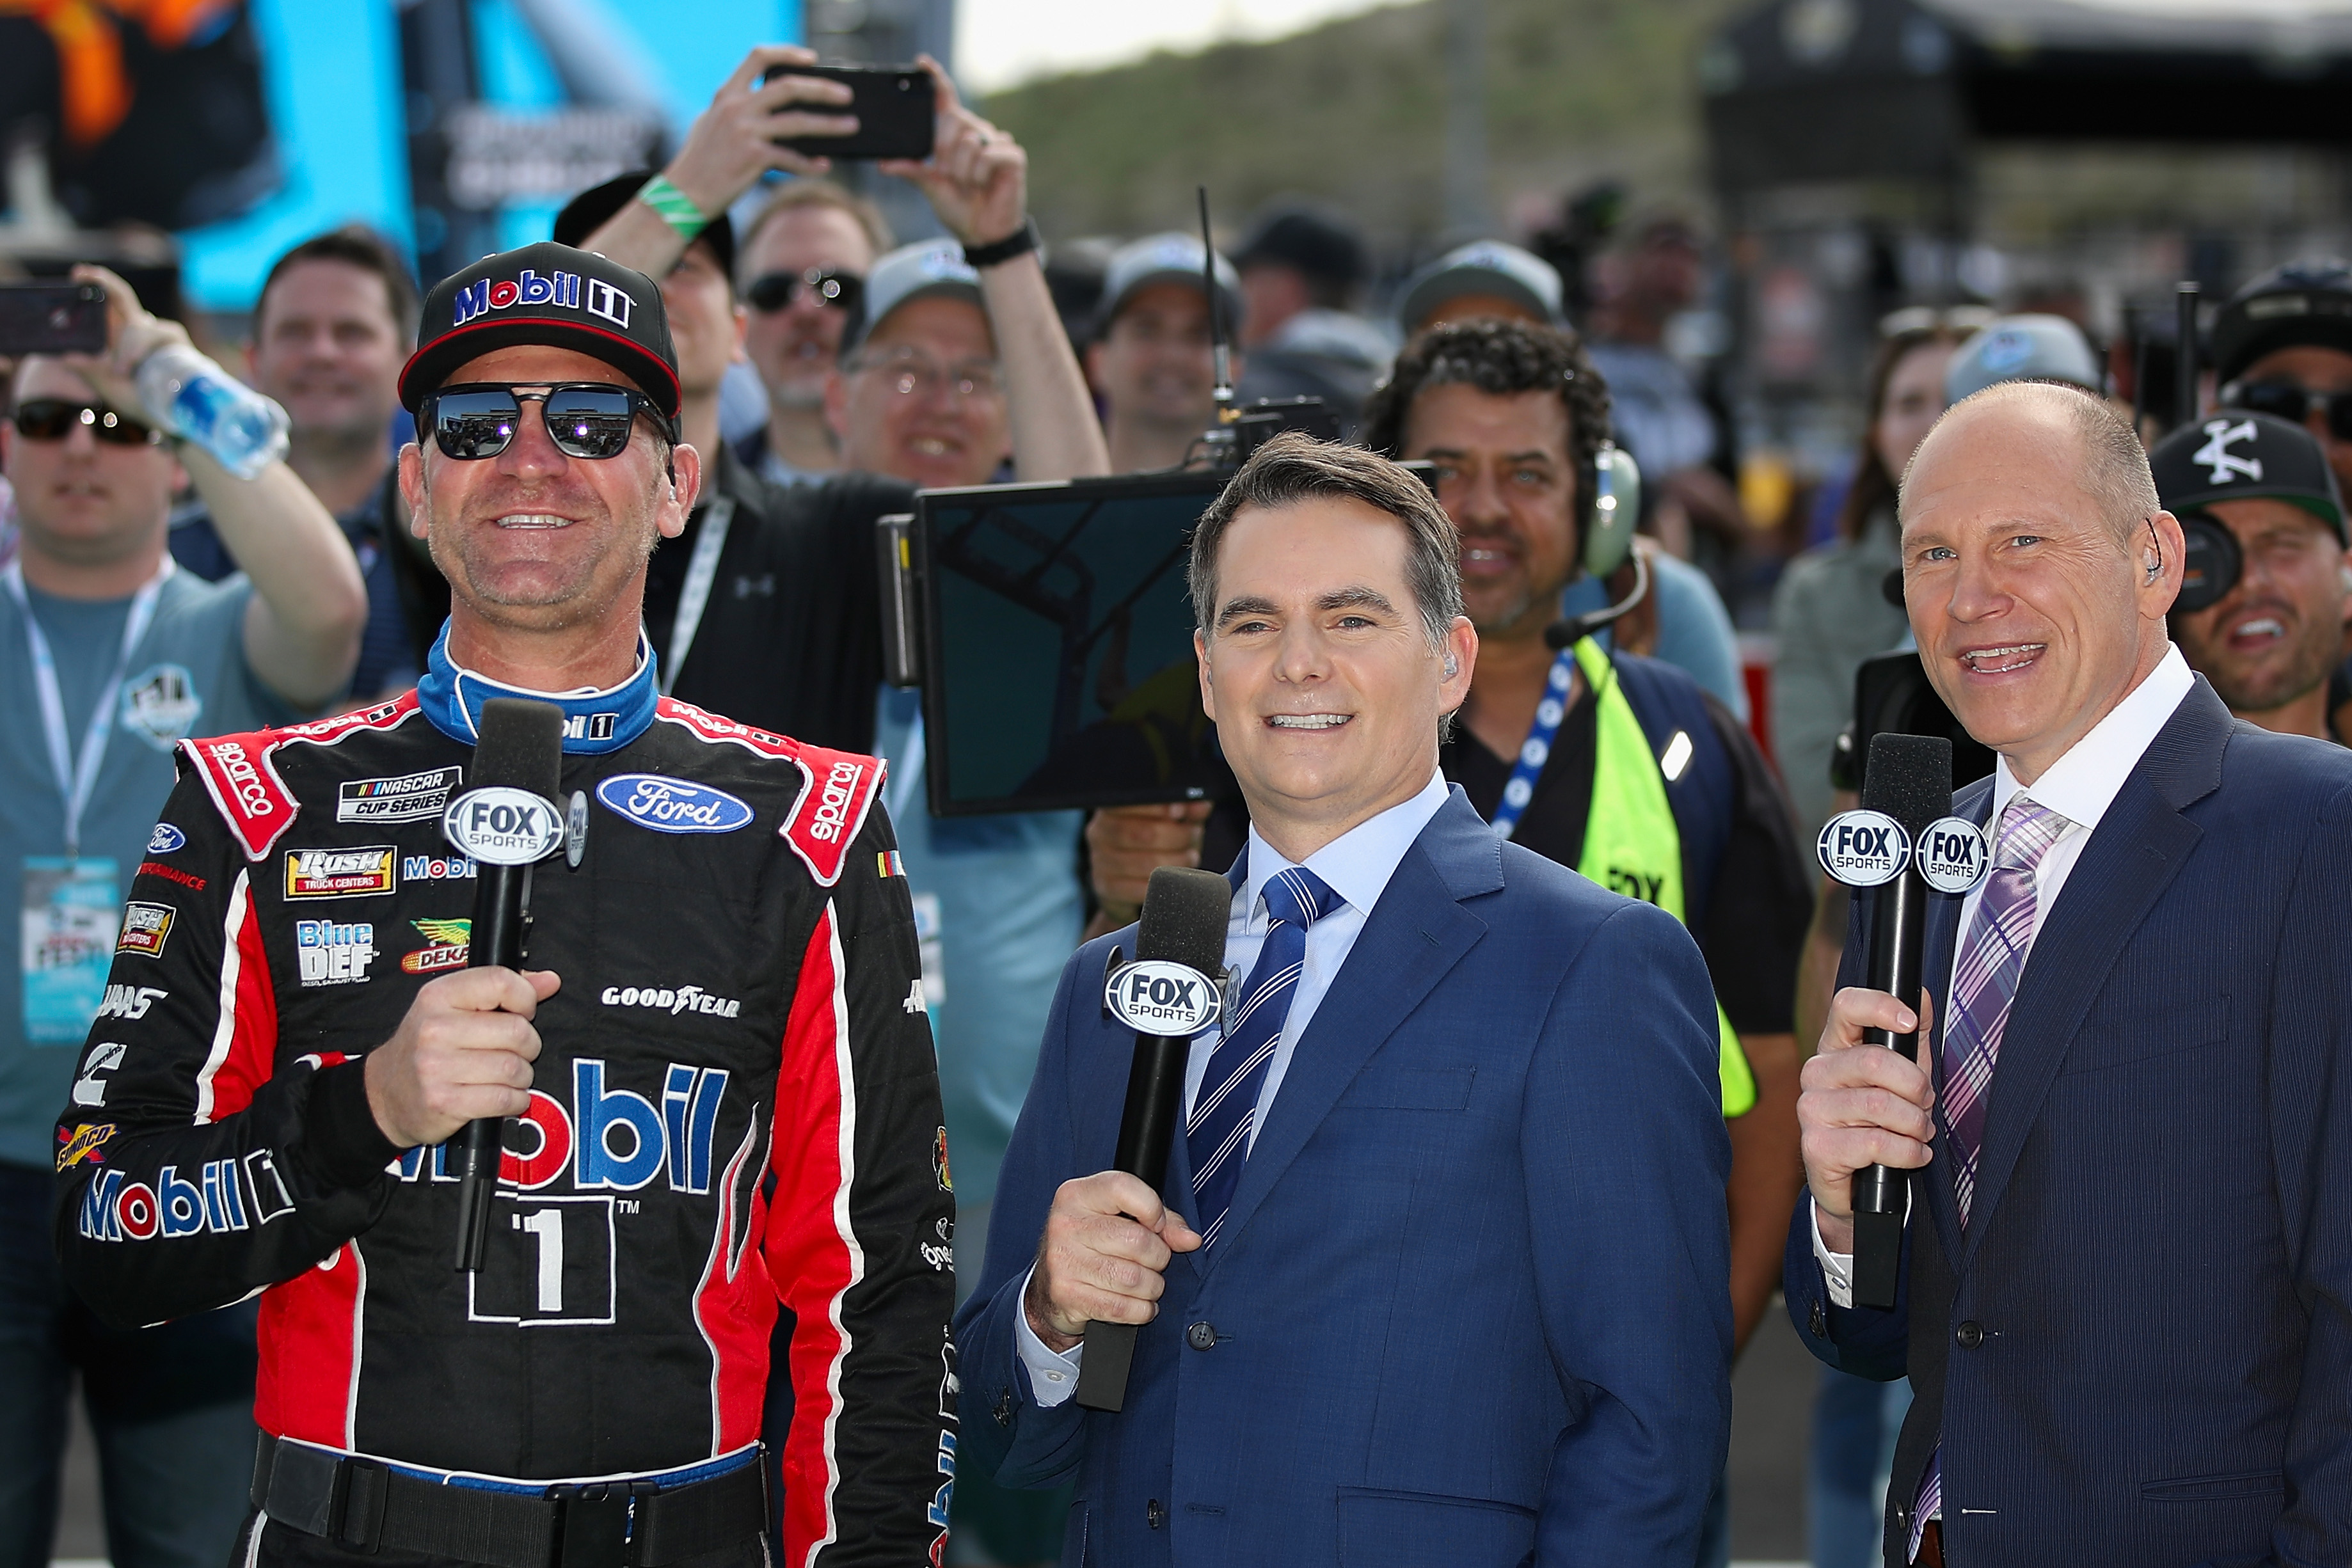 will Jeff Gordon make Clint Bowyer pay up in the booth?